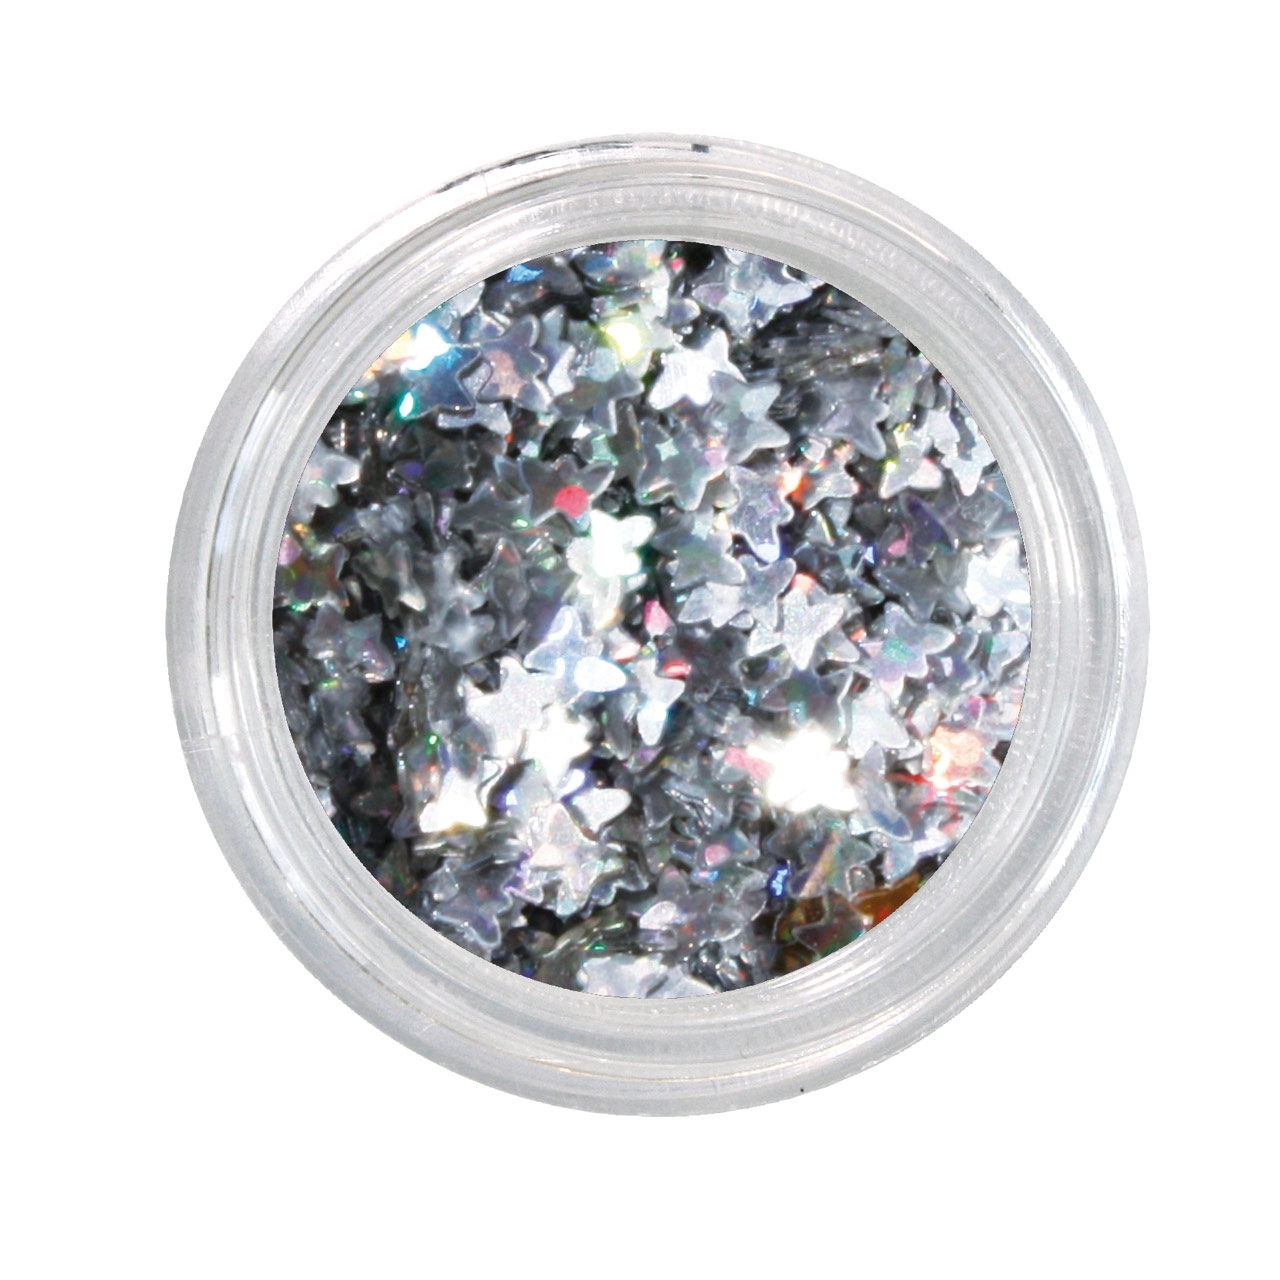 BAEHR BEAUTY CONCEPT NAILS Nailglitter Stars silver